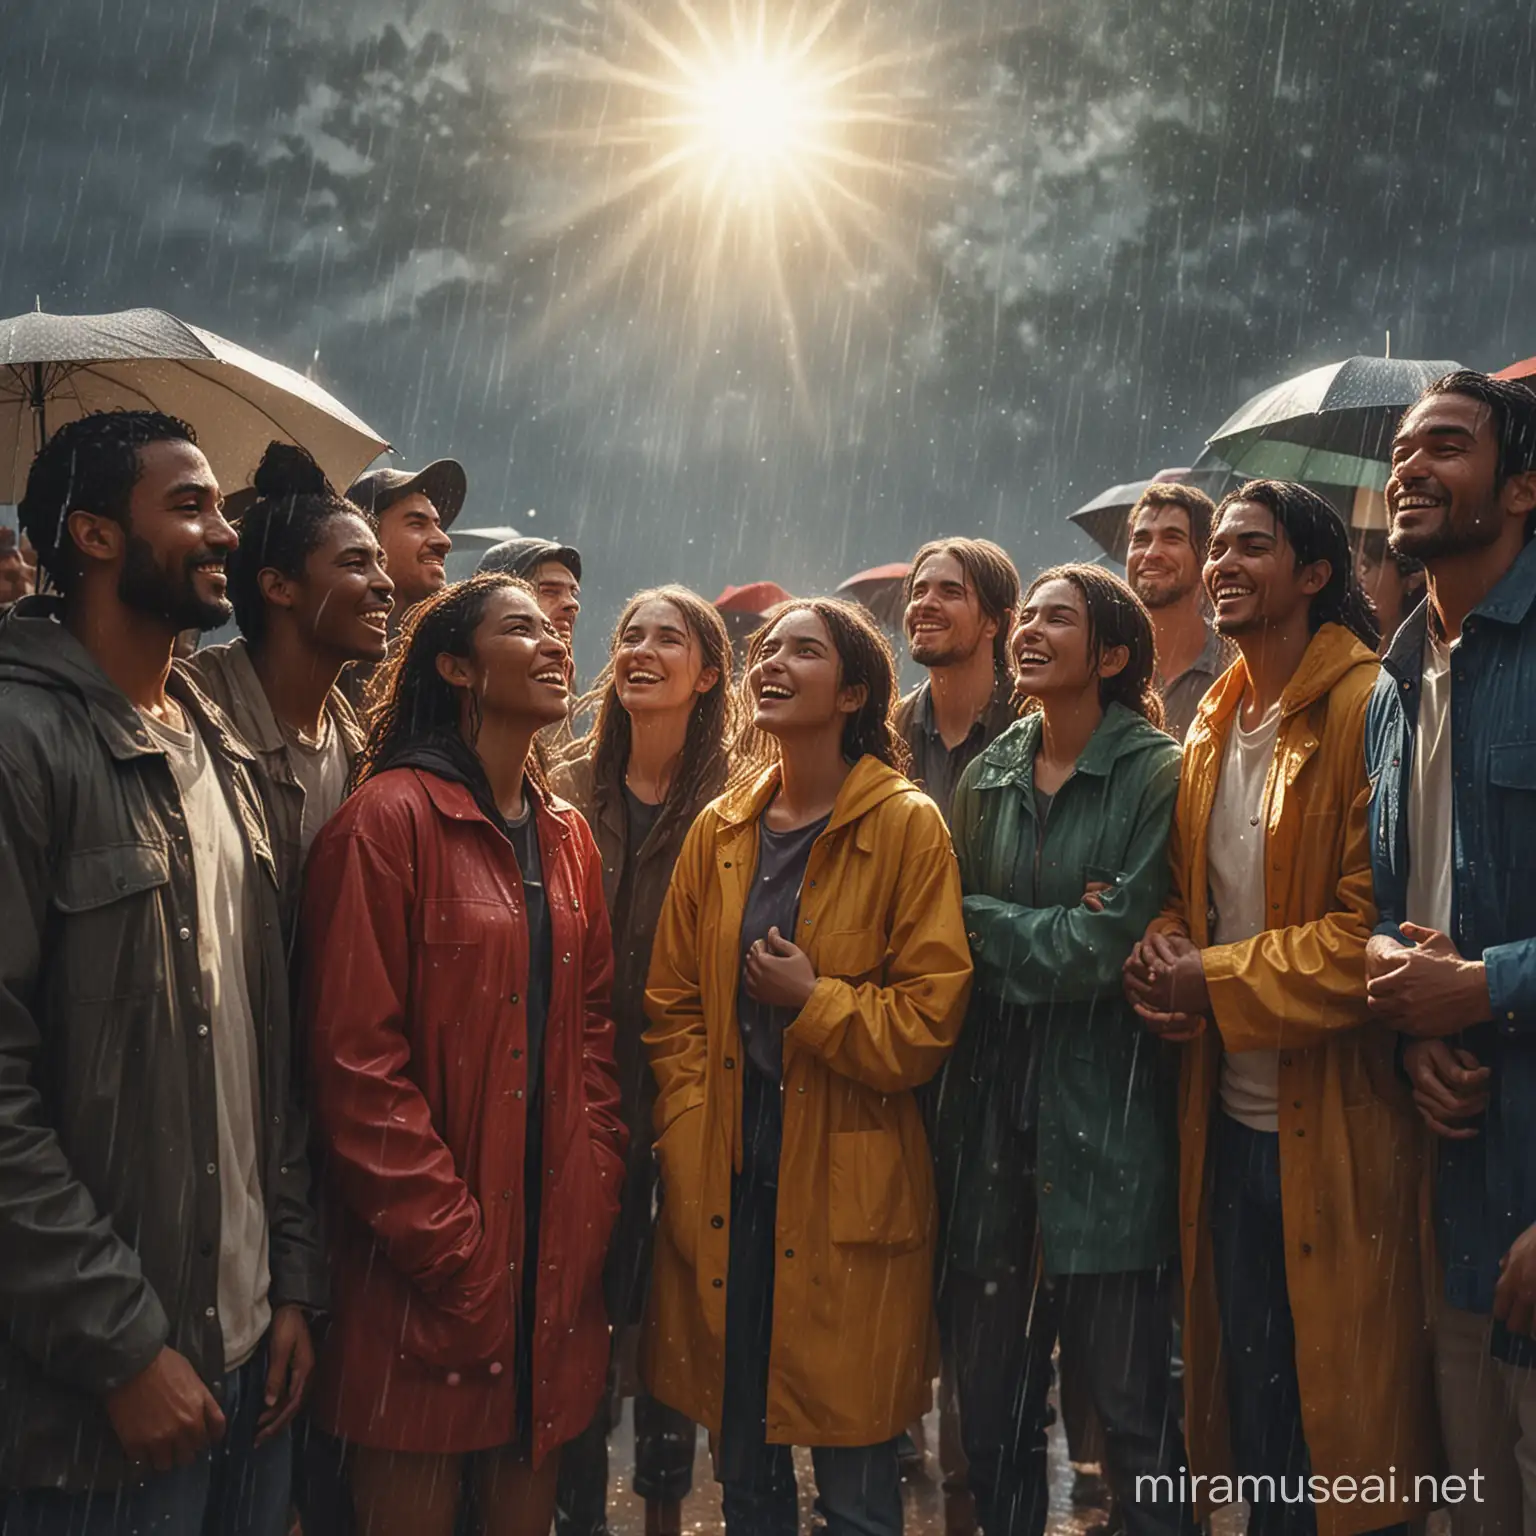 [Image description: A vivid illustration depicts a group of diverse individuals standing together under a bright sun, while rain pours down around them. They are huddled closely, supporting each other through the storm. In the foreground, a person gazes out confidently, their expression reflecting the realization of who their true allies are amidst both adversity and joy.]